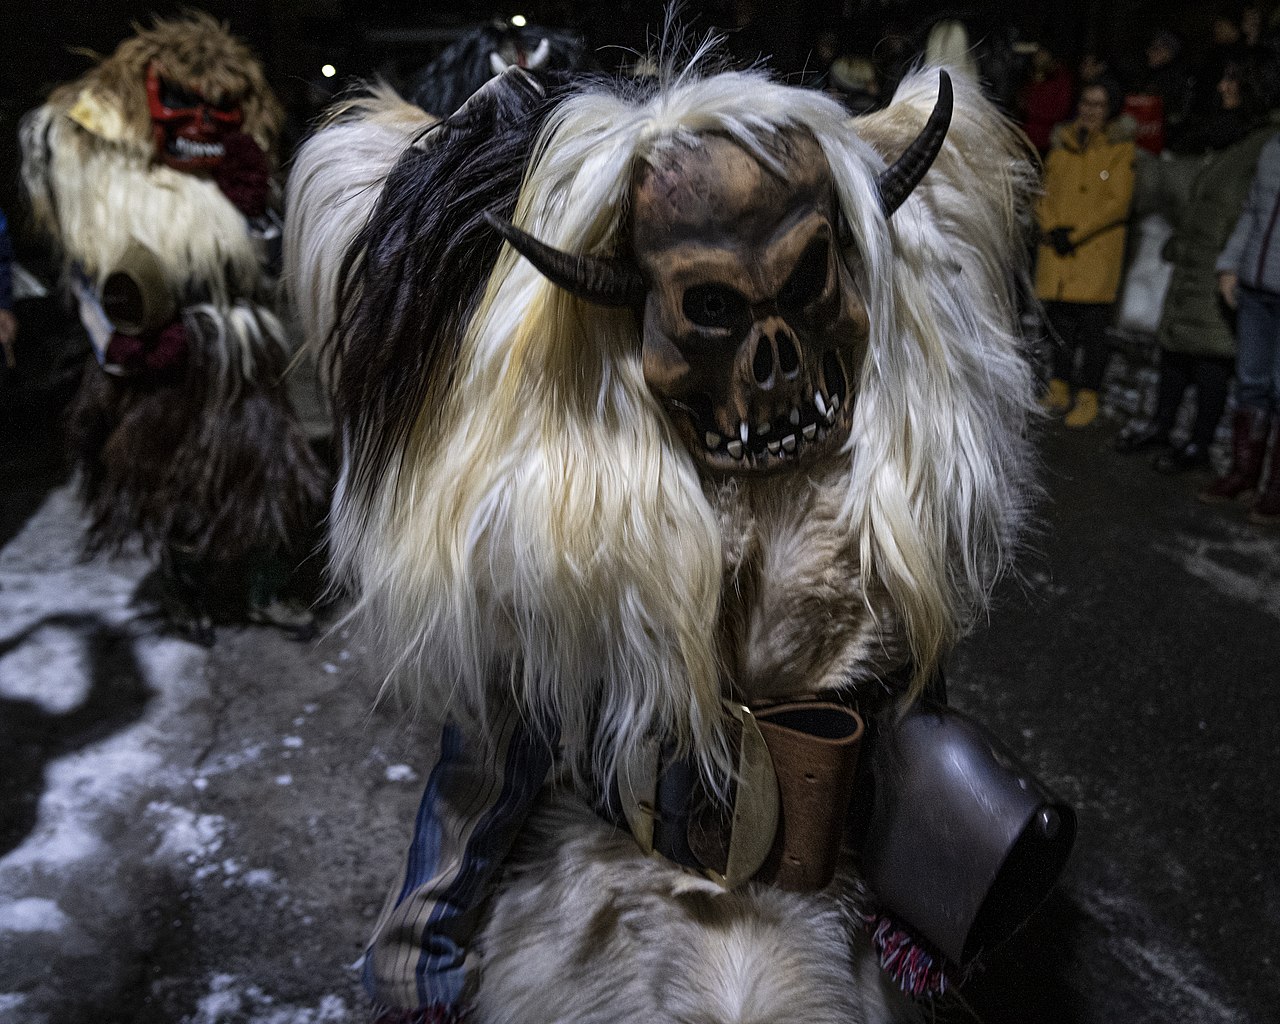 giant cowbell and scary mask pagan ritual Swiss Alps